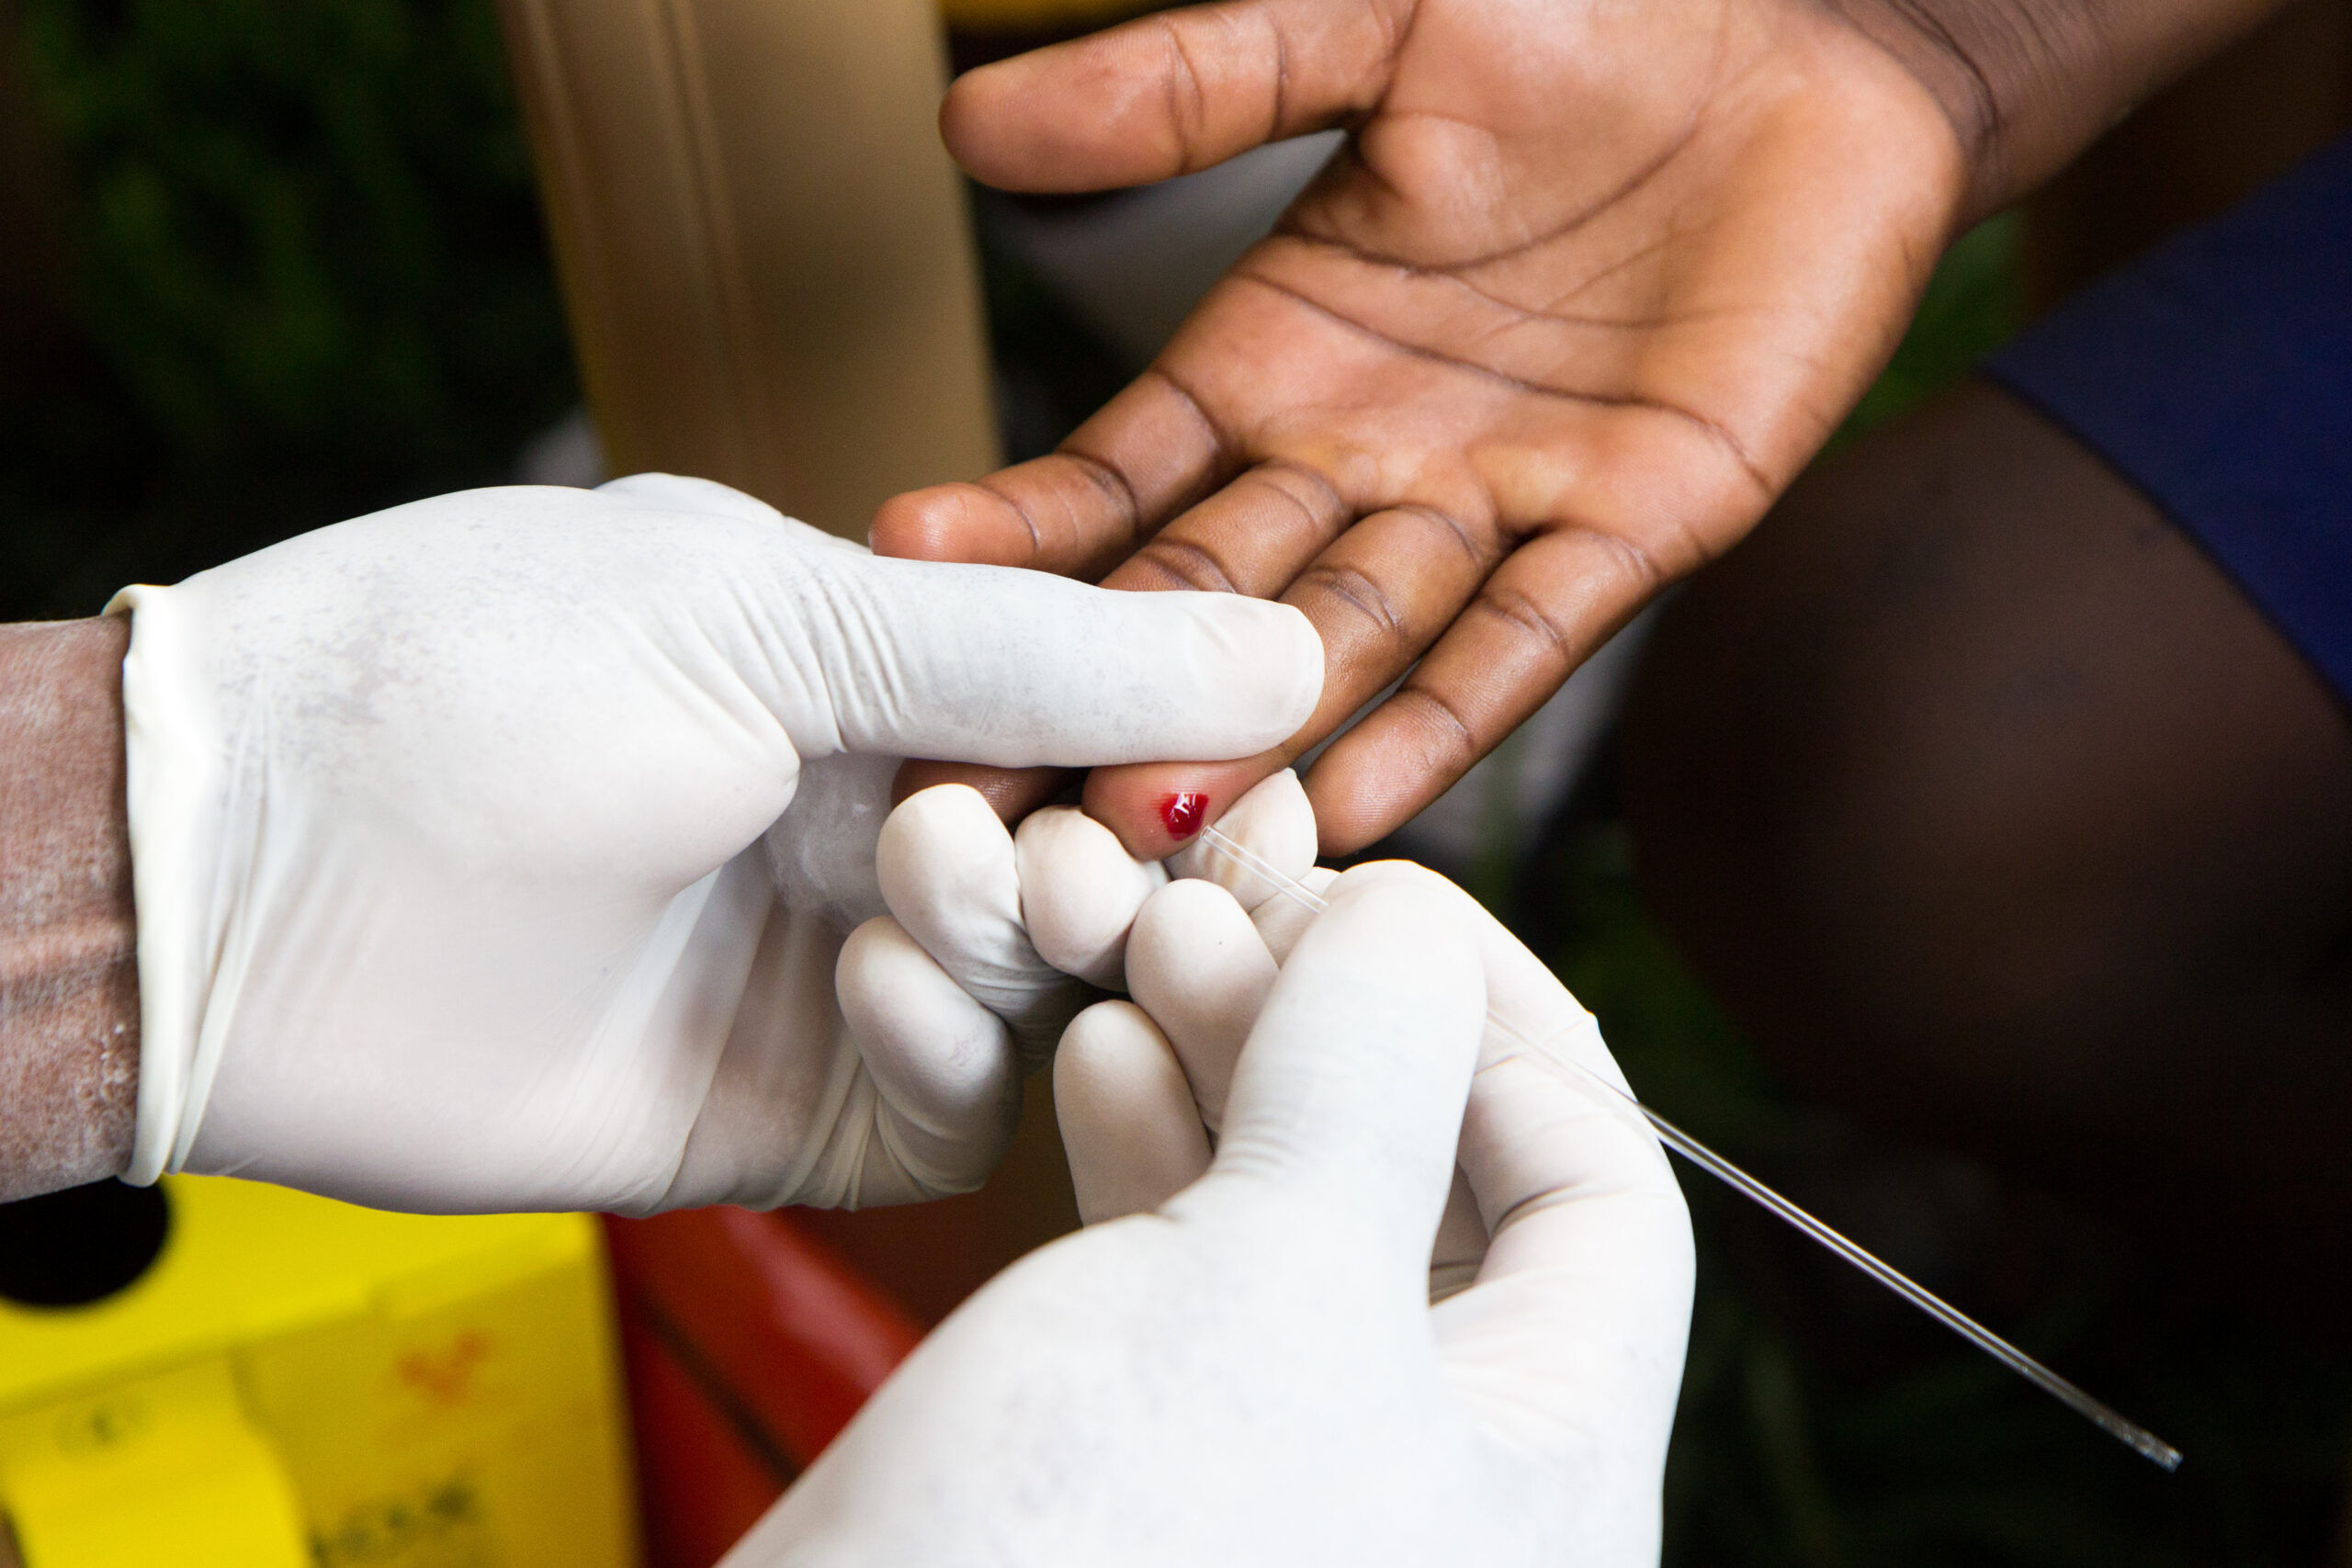 A health care worker doing a finger prick test for HIV in Uganda in 2017,